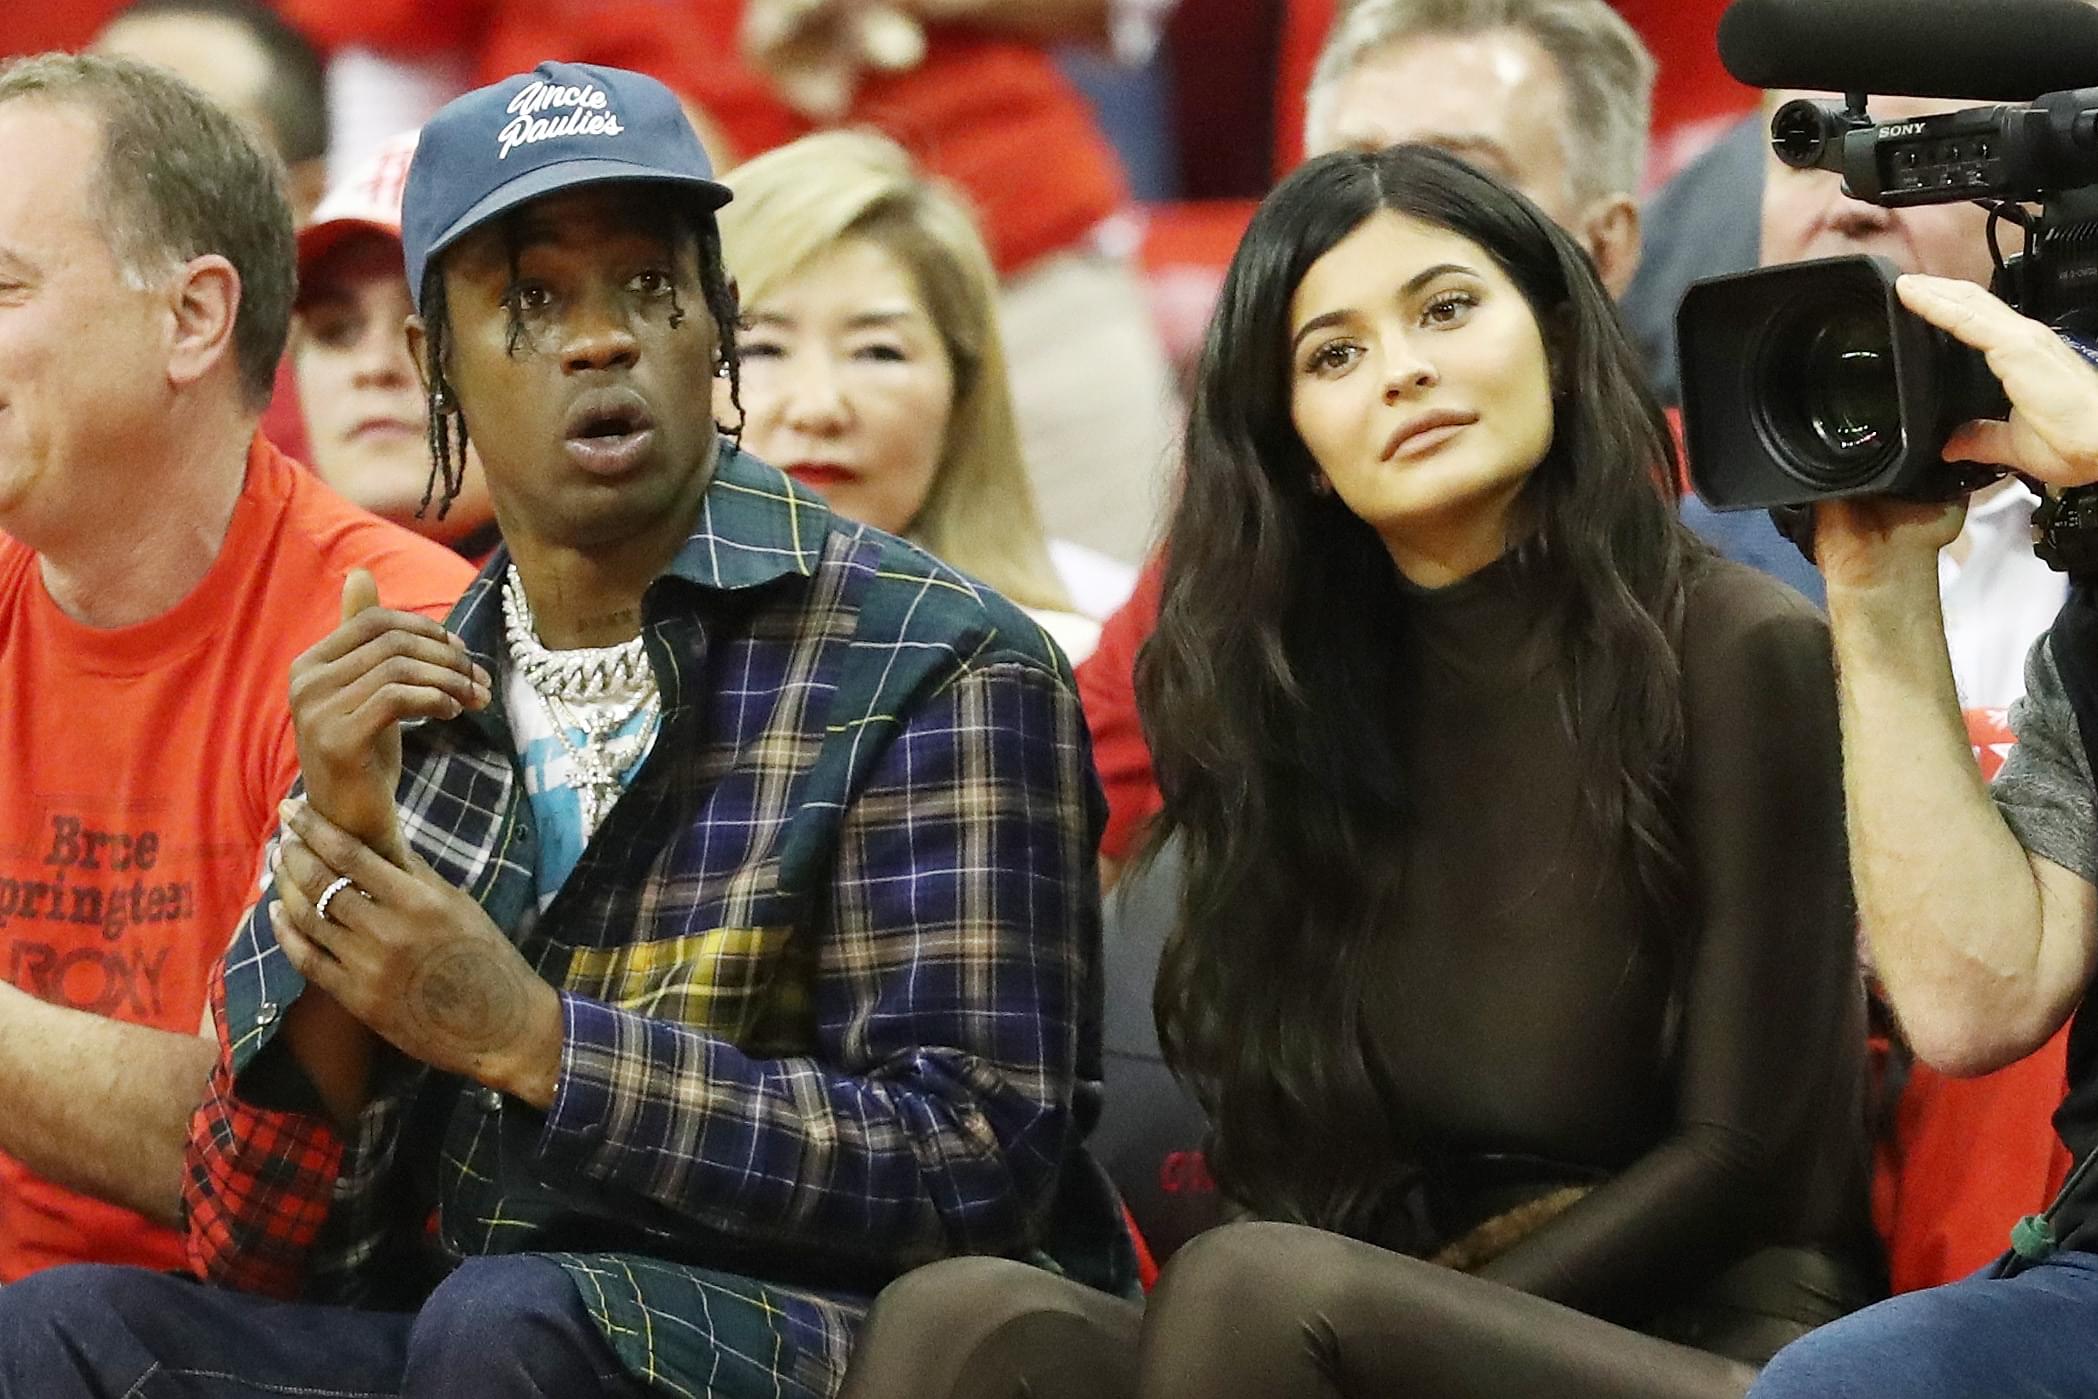 Travis Scott Orders “Secret Service-Style” Security Guards For Family